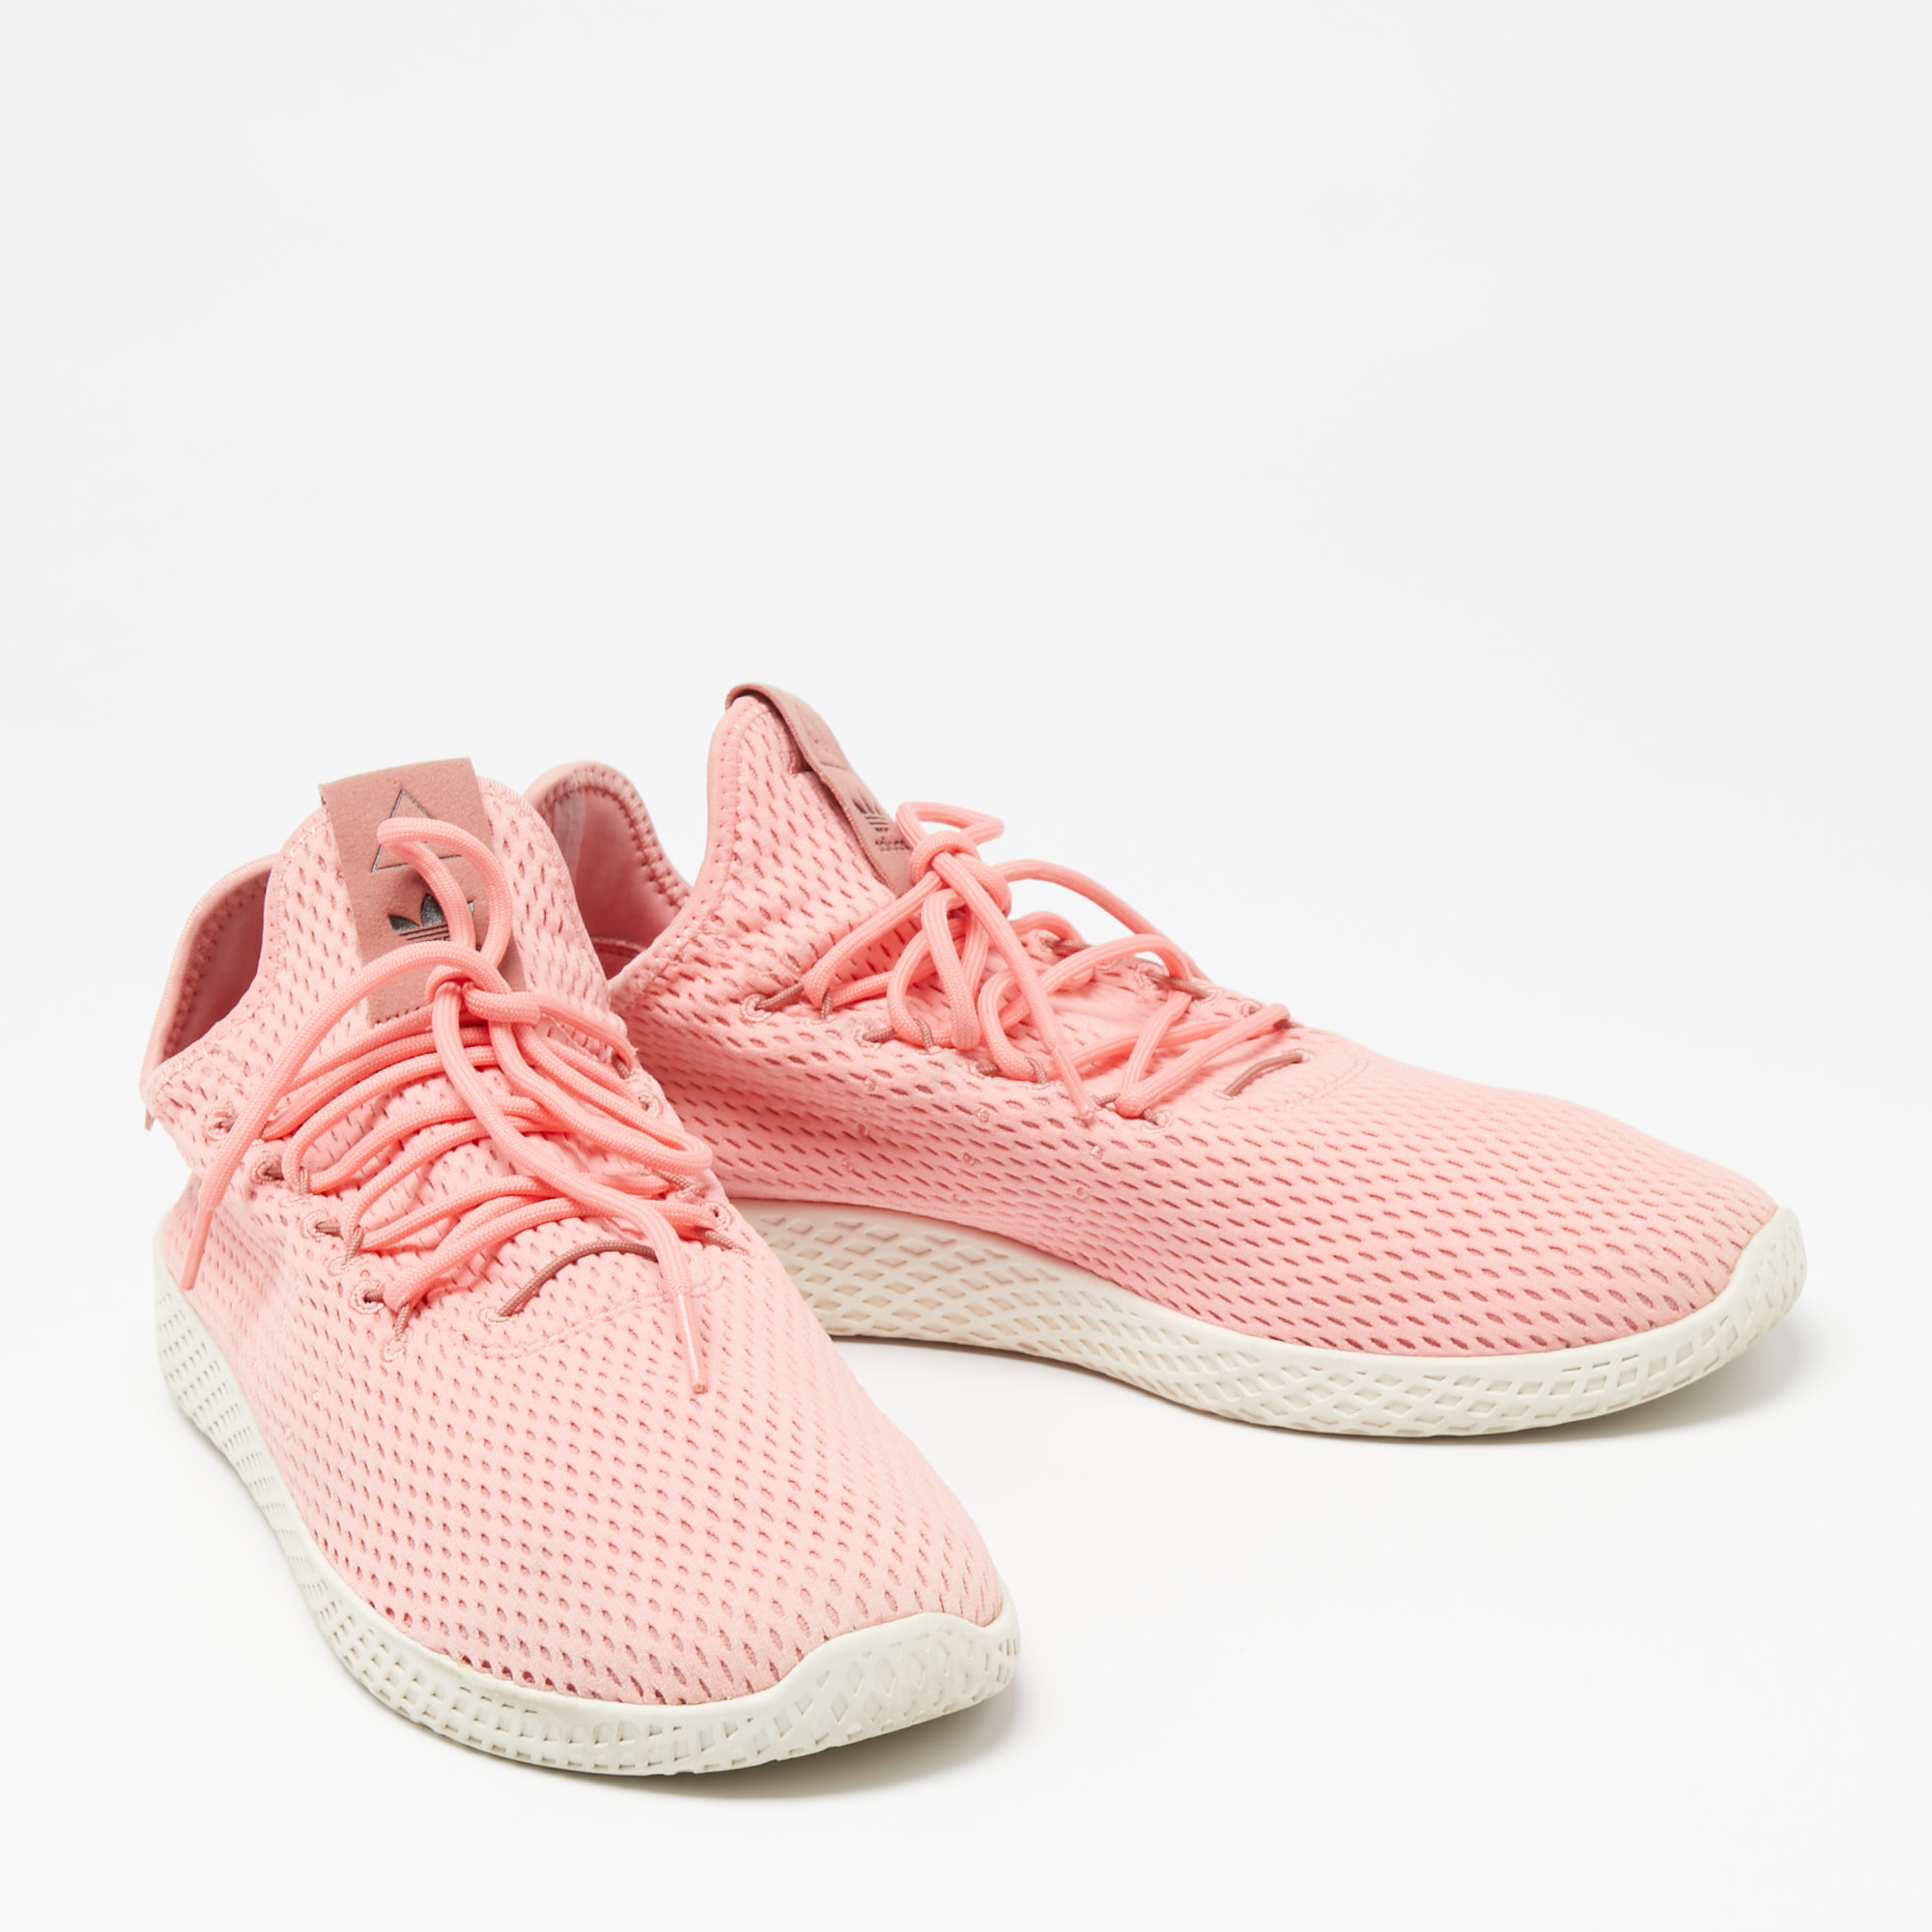 Adidas X Pharell Williams Rose Pink Fabric Tennis Sneakers  Size 47.5